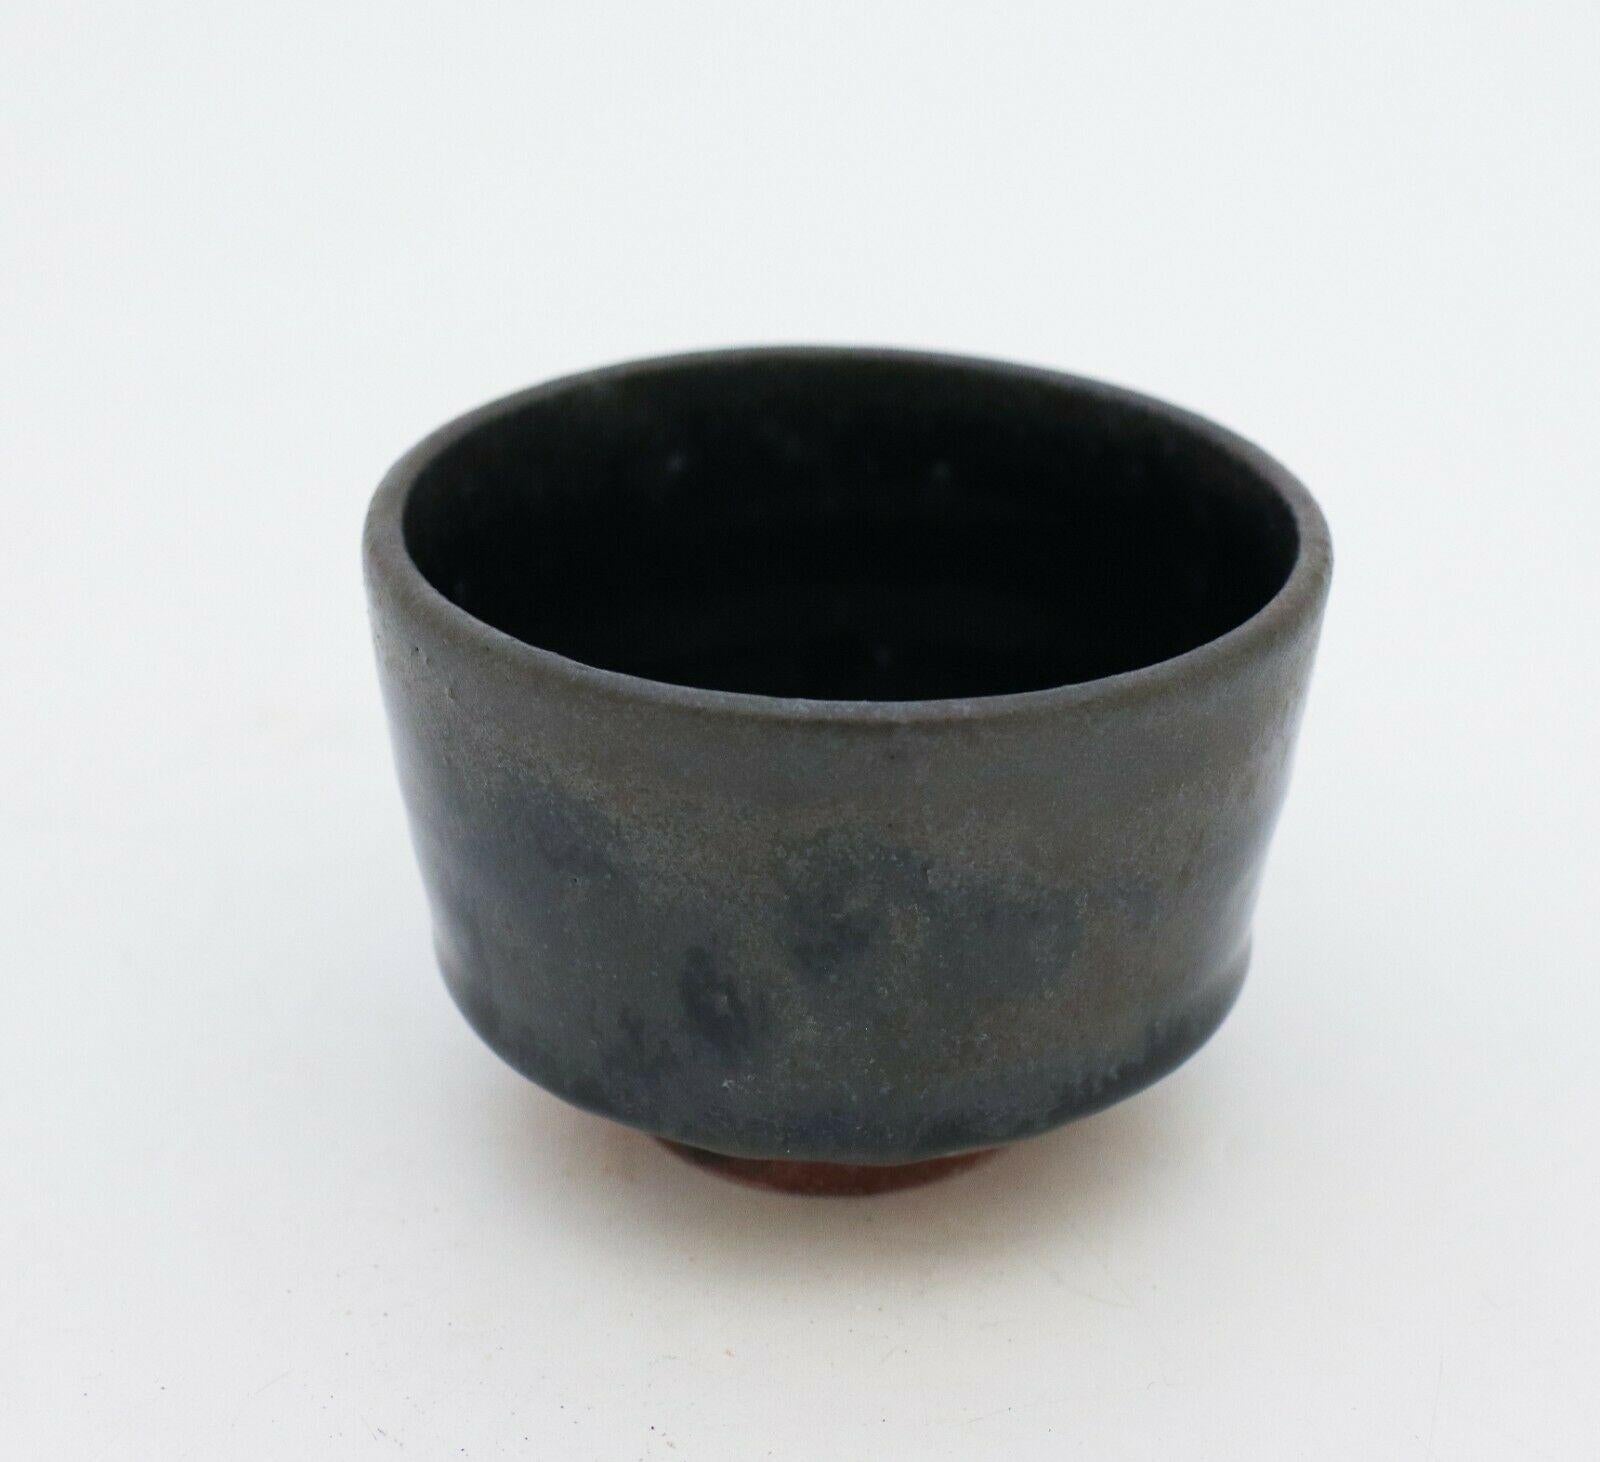 A beautiful chawan bowl with black/dark blue glaze designed by the contemporary Swedish artist Isak Isaksson in his own studio. The bowl is 9,5 cm (3,8